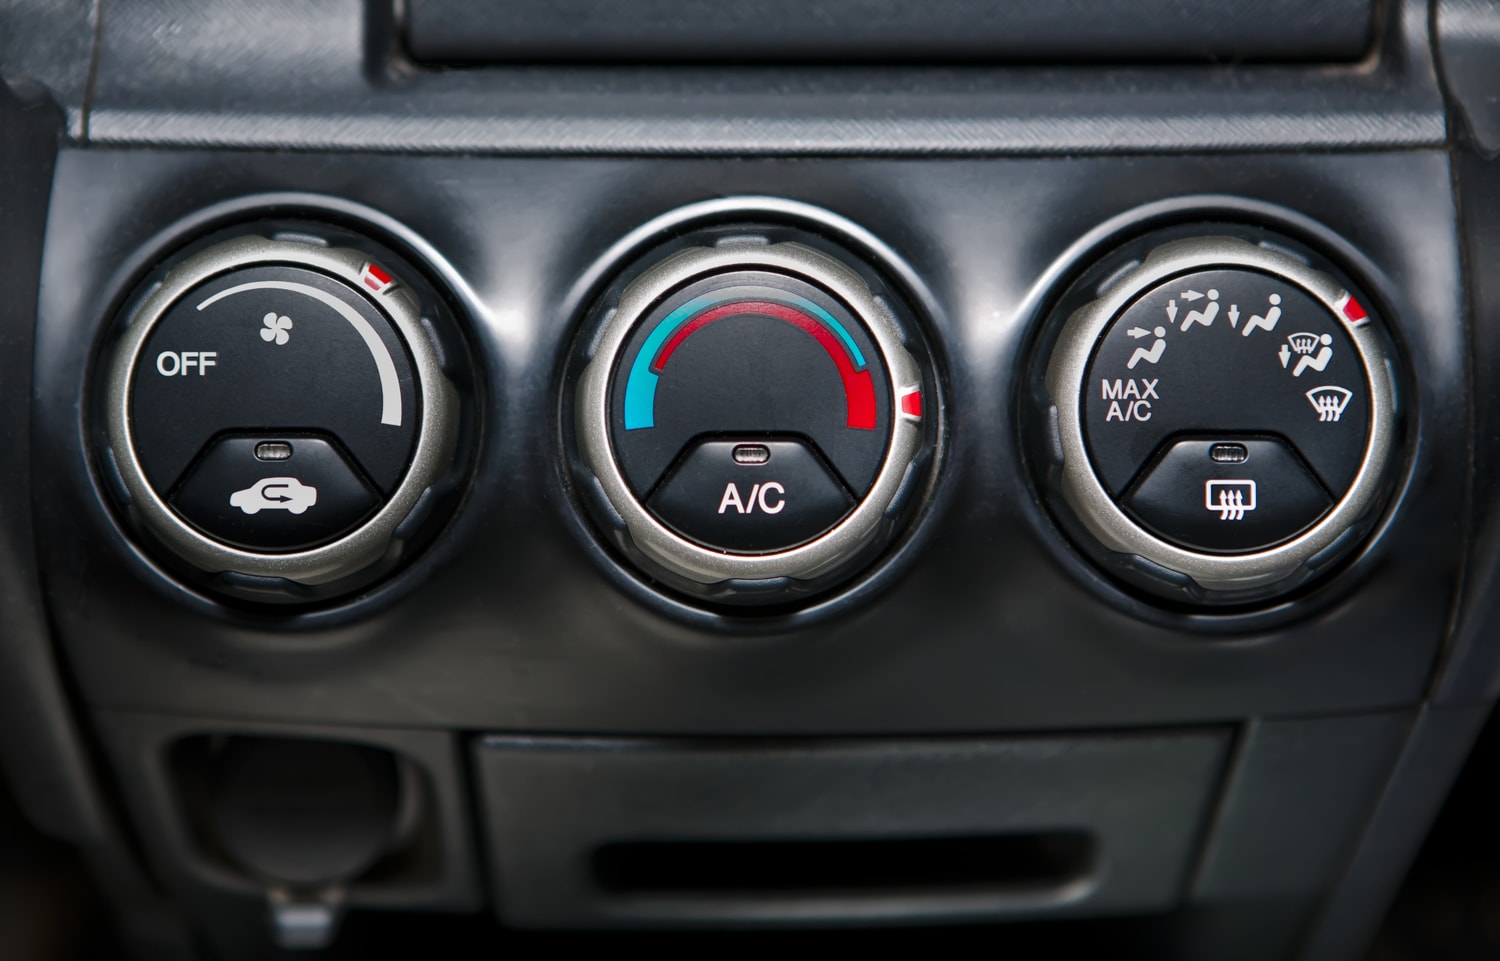 How To Check My Car Air Conditioning